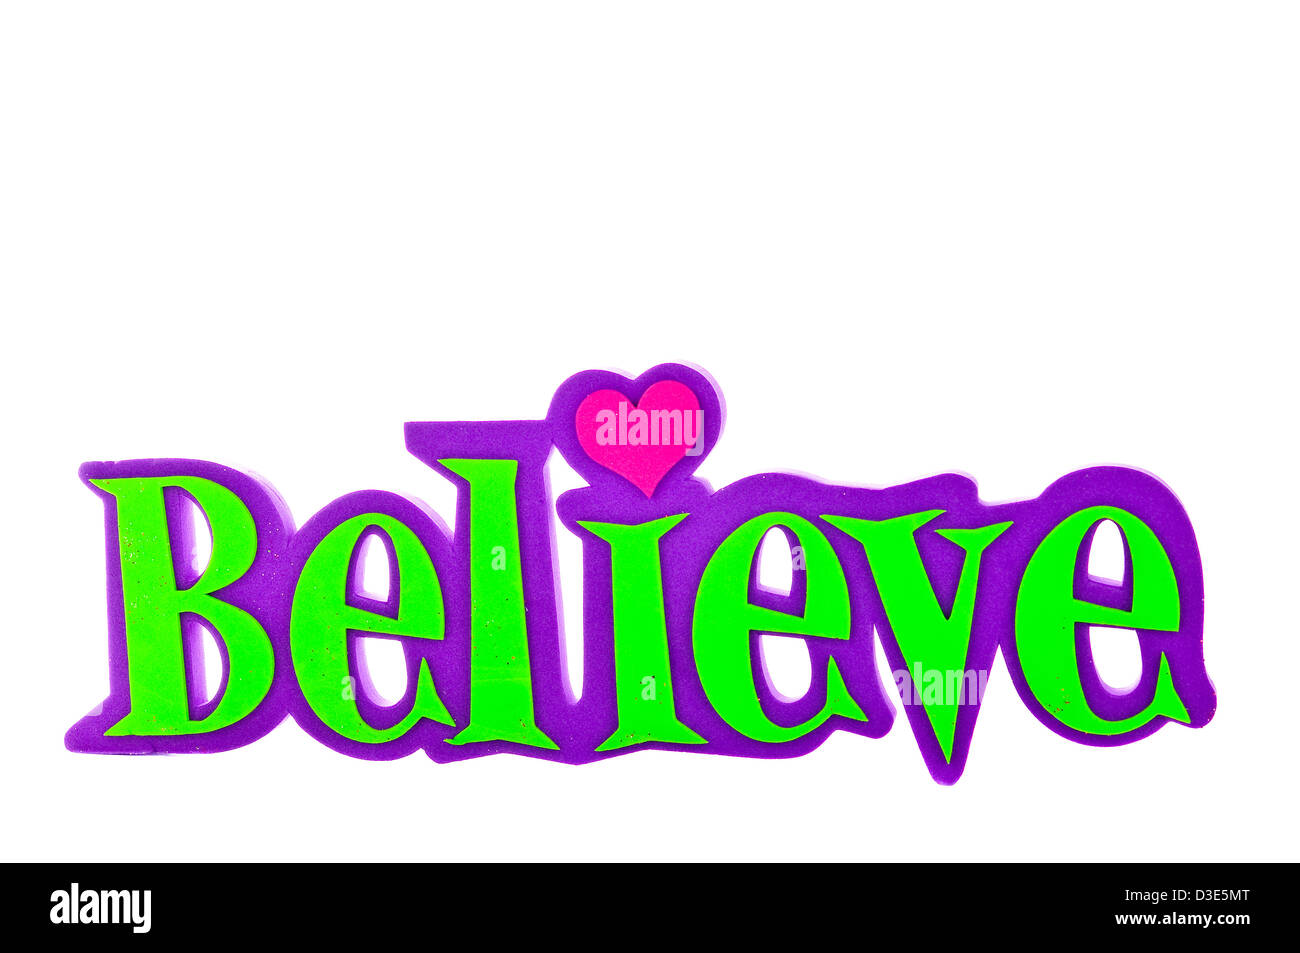 https://c8.alamy.com/comp/D3E5MT/word-spells-believe-in-green-and-purple-letters-isolated-on-white-D3E5MT.jpg